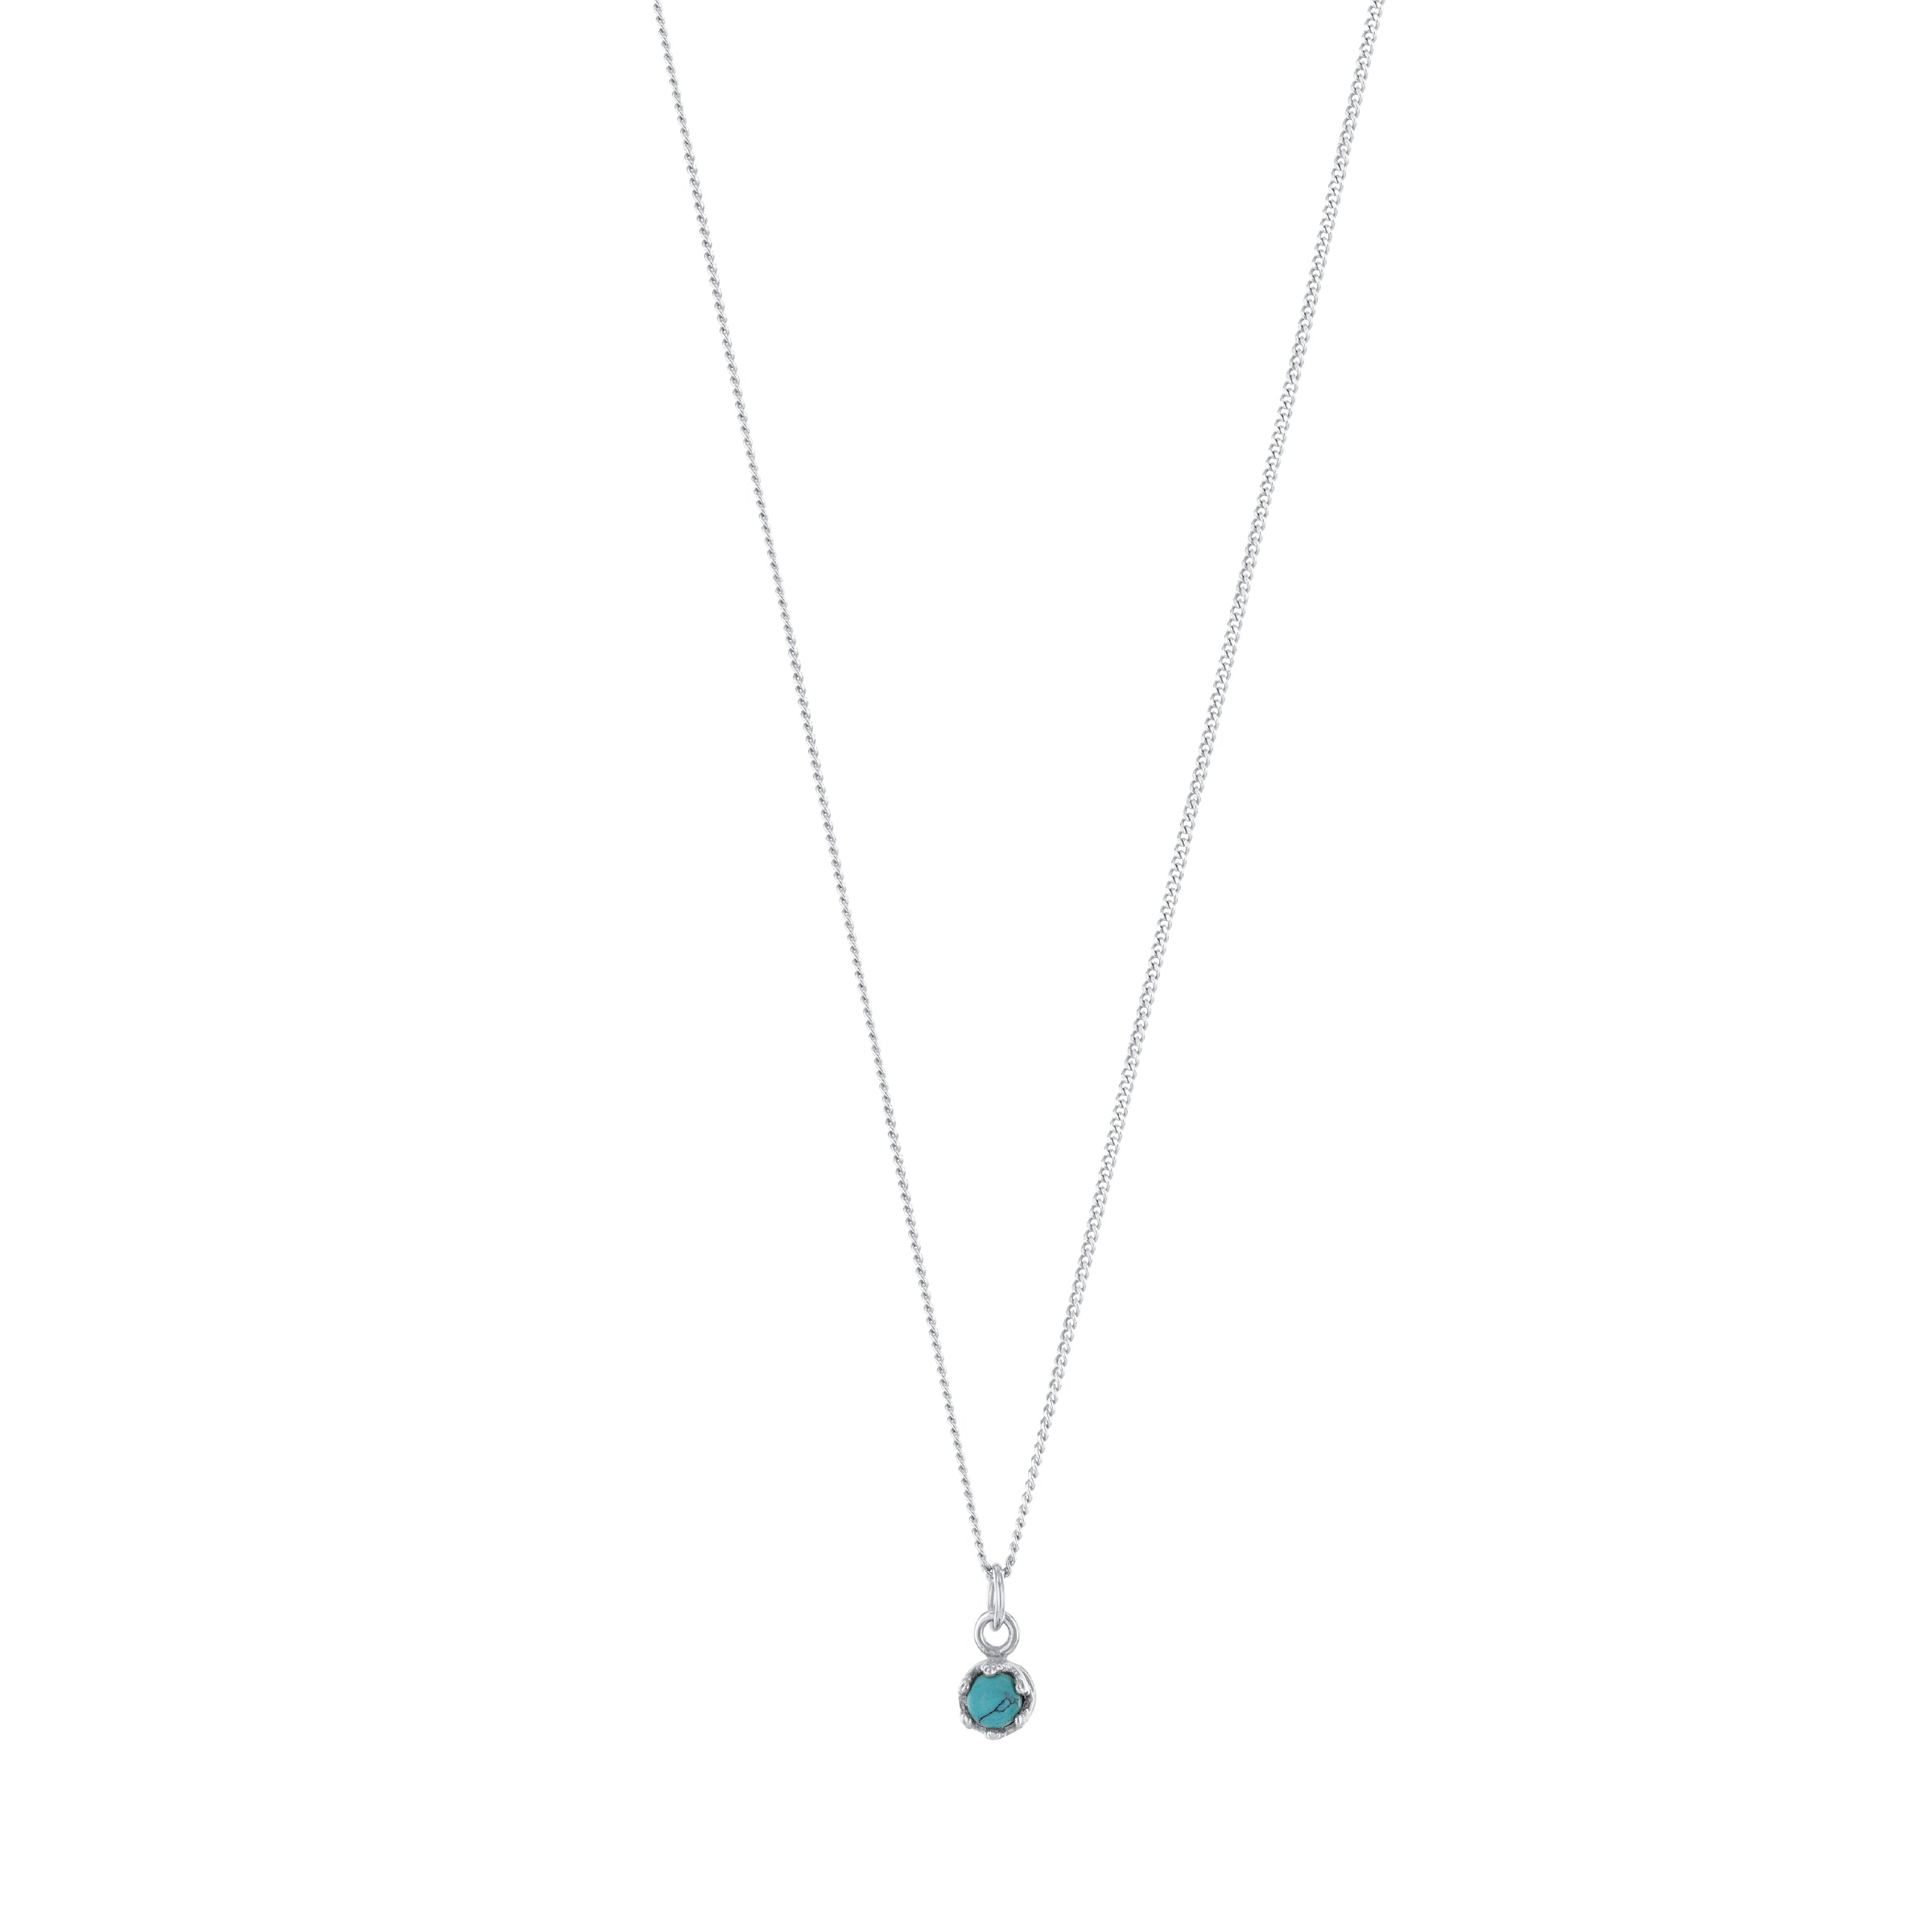 Turquoise Gemstone Necklace Sterling Silver